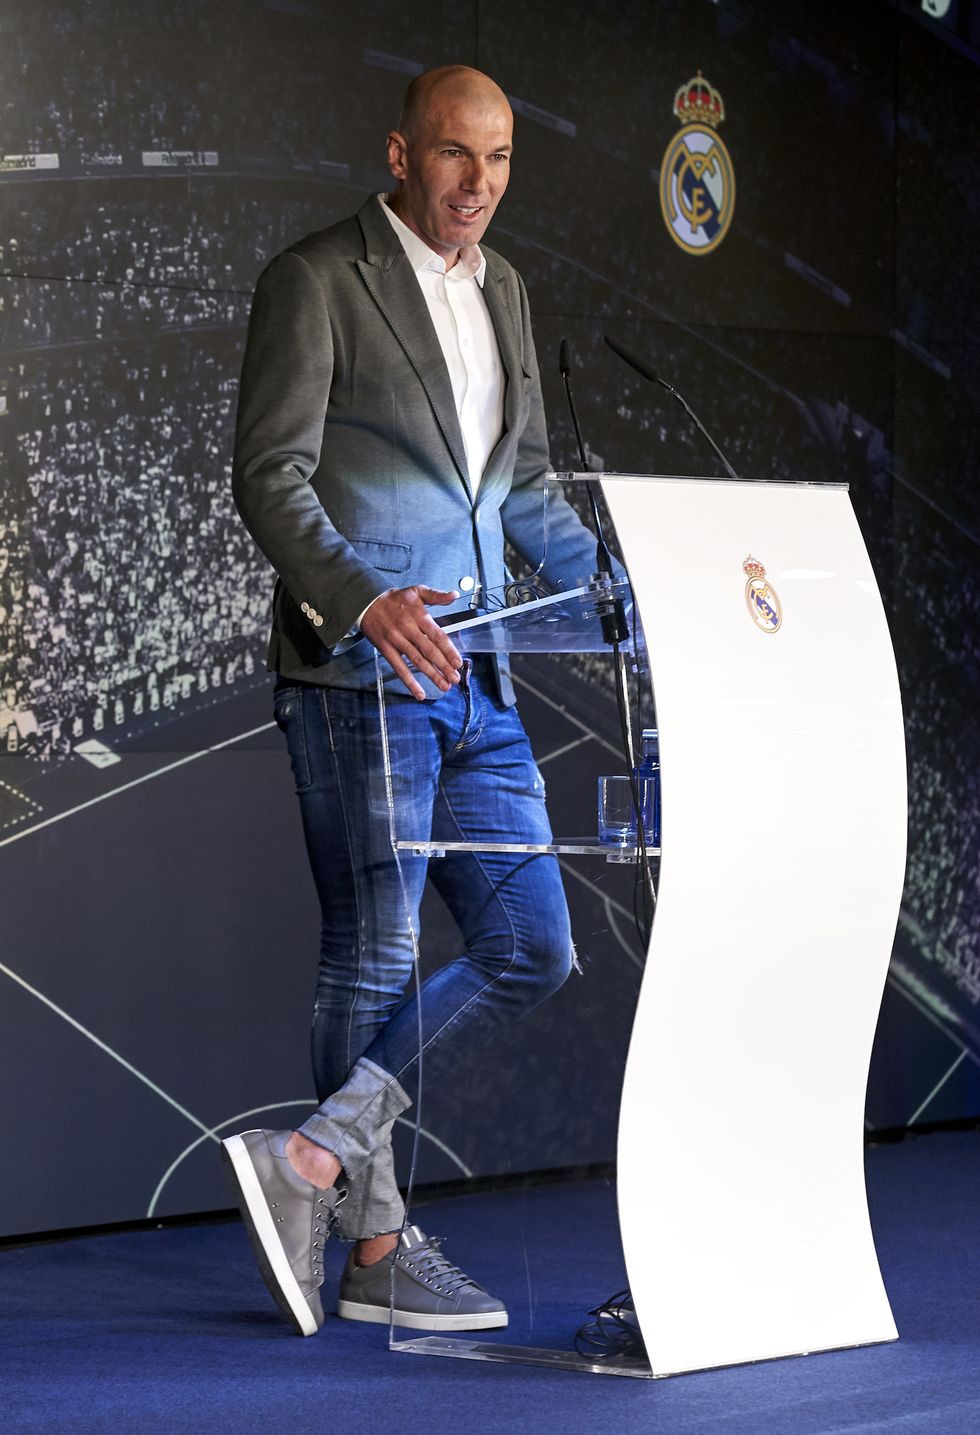 madrid, spain   march 11 zinedine zidane, addresses the media after being announced as new real madrid head coach at estadio santiago bernabeu on march 11, 2019 in madrid, spain photo by quality sport imagesgetty images